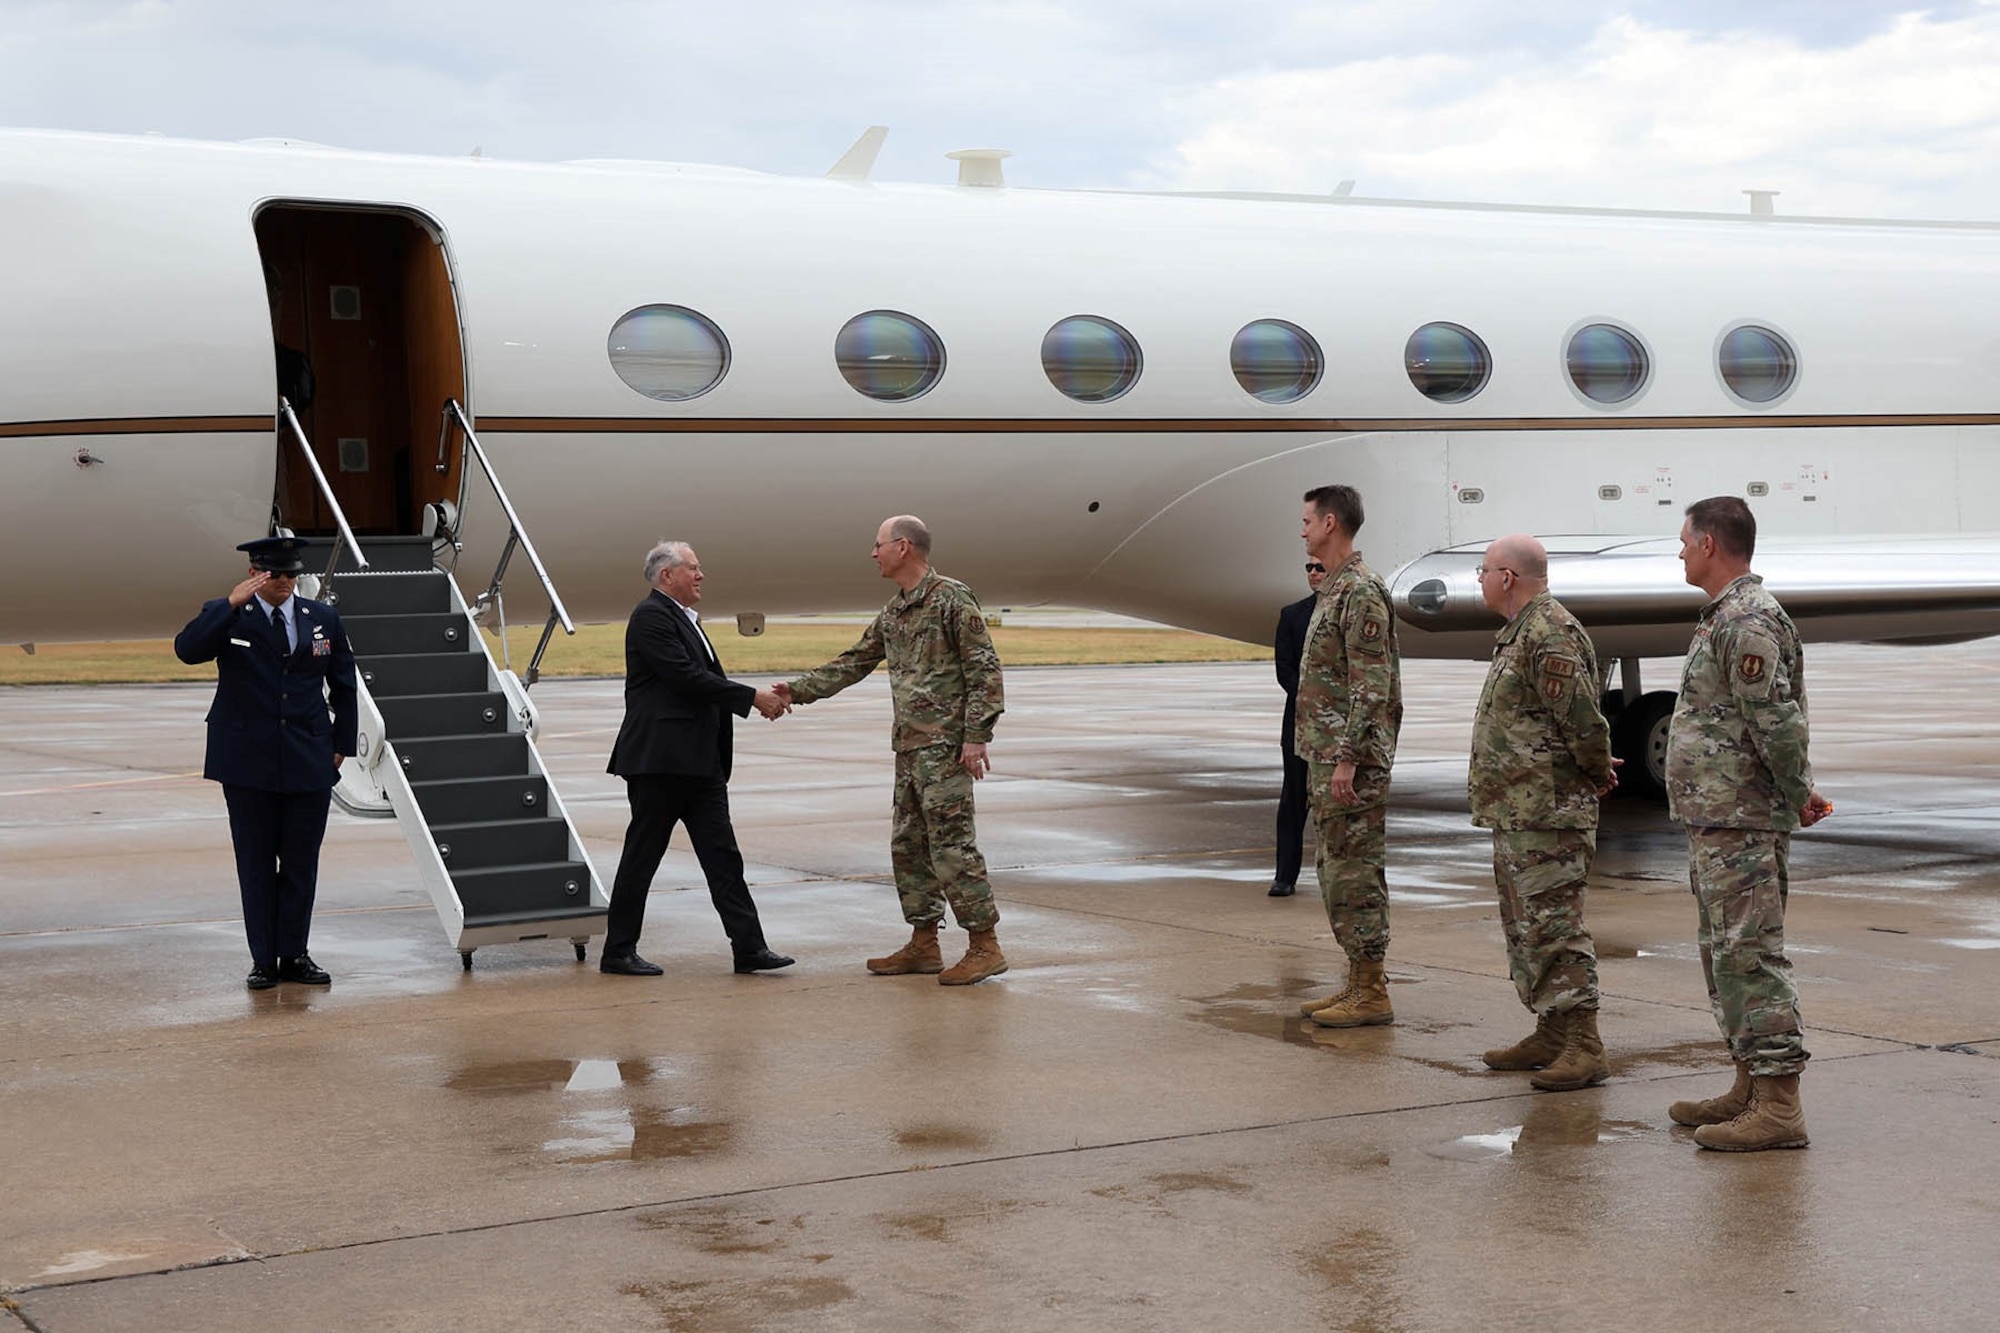 Secretary of the Air Force Frank Kendall arrives at Tinker Air Force base and is greeted by Gen. Duke Richardson, Air Force Materiel Command Commander, Lt. Gen. Tom Miller, Air Force Sustainment Center Commander, Maj. Gen. Jeff King, Oklahoma City Air Logistics Complex Commander, and Col. G. Hall Sebren, 72 Air Base Wing Commander.